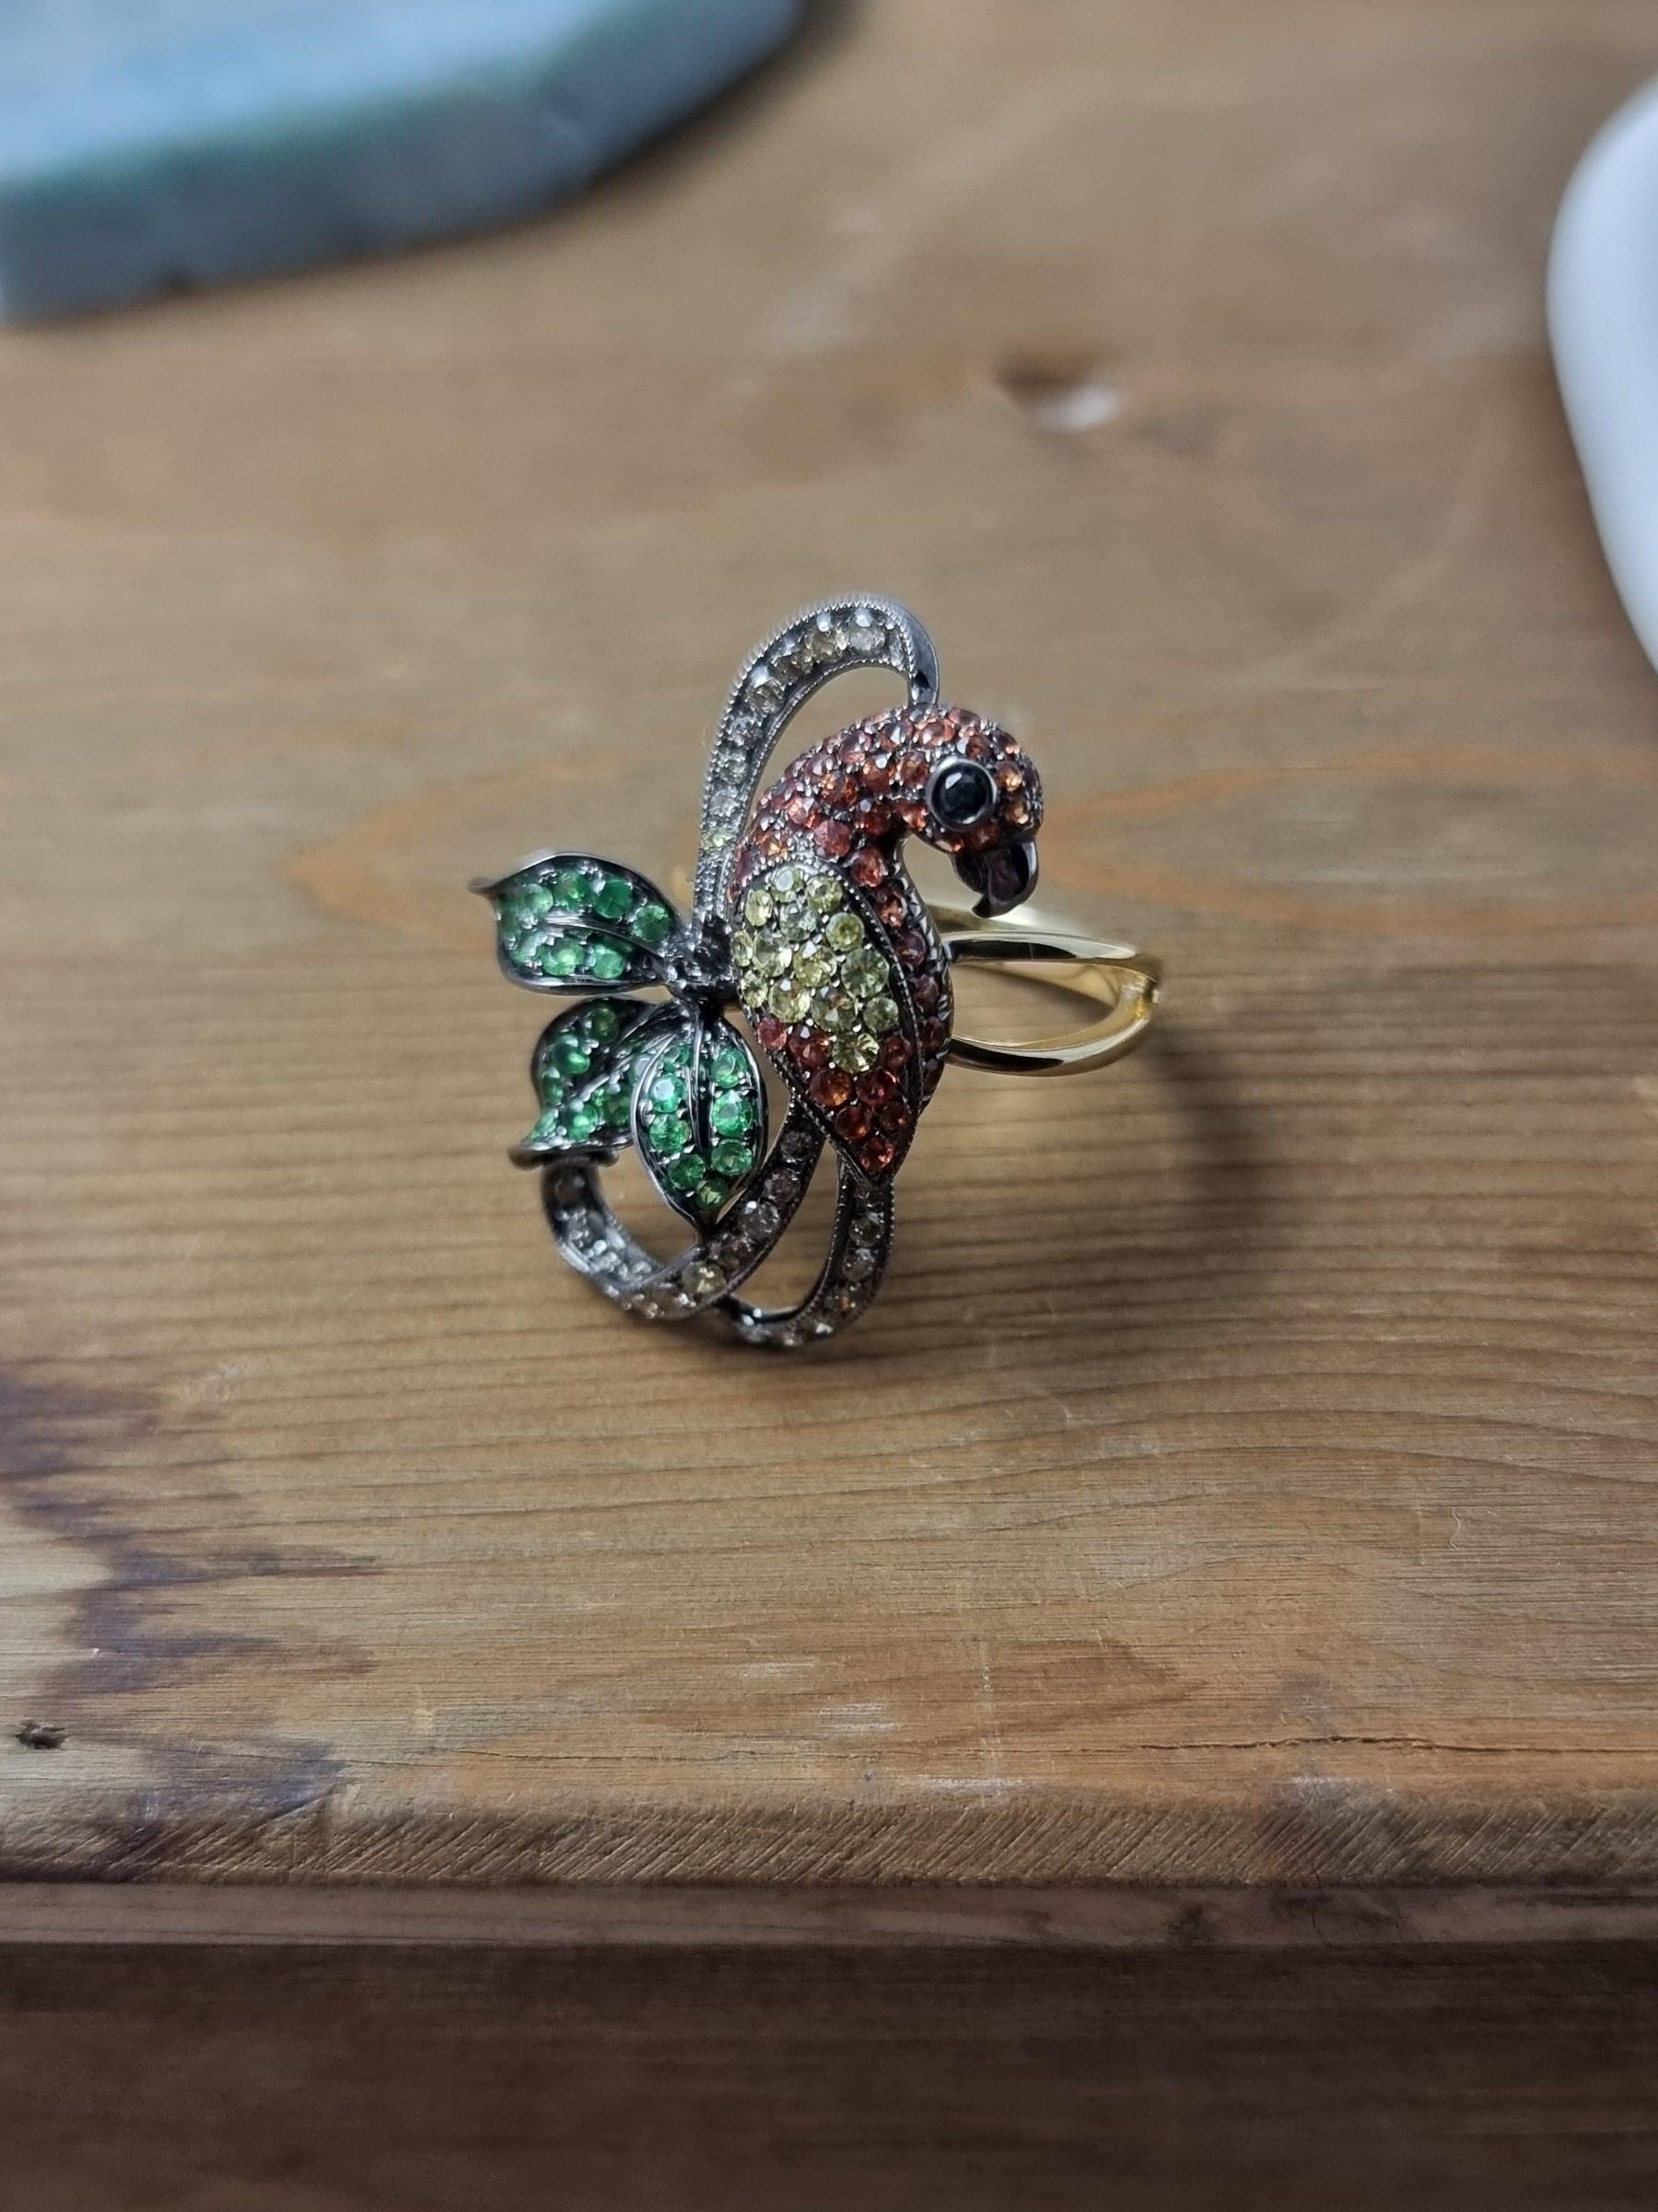 Women's 14K Gold Colourful Parrot Ring with Diamonds, Garnets and Sapphires For Sale